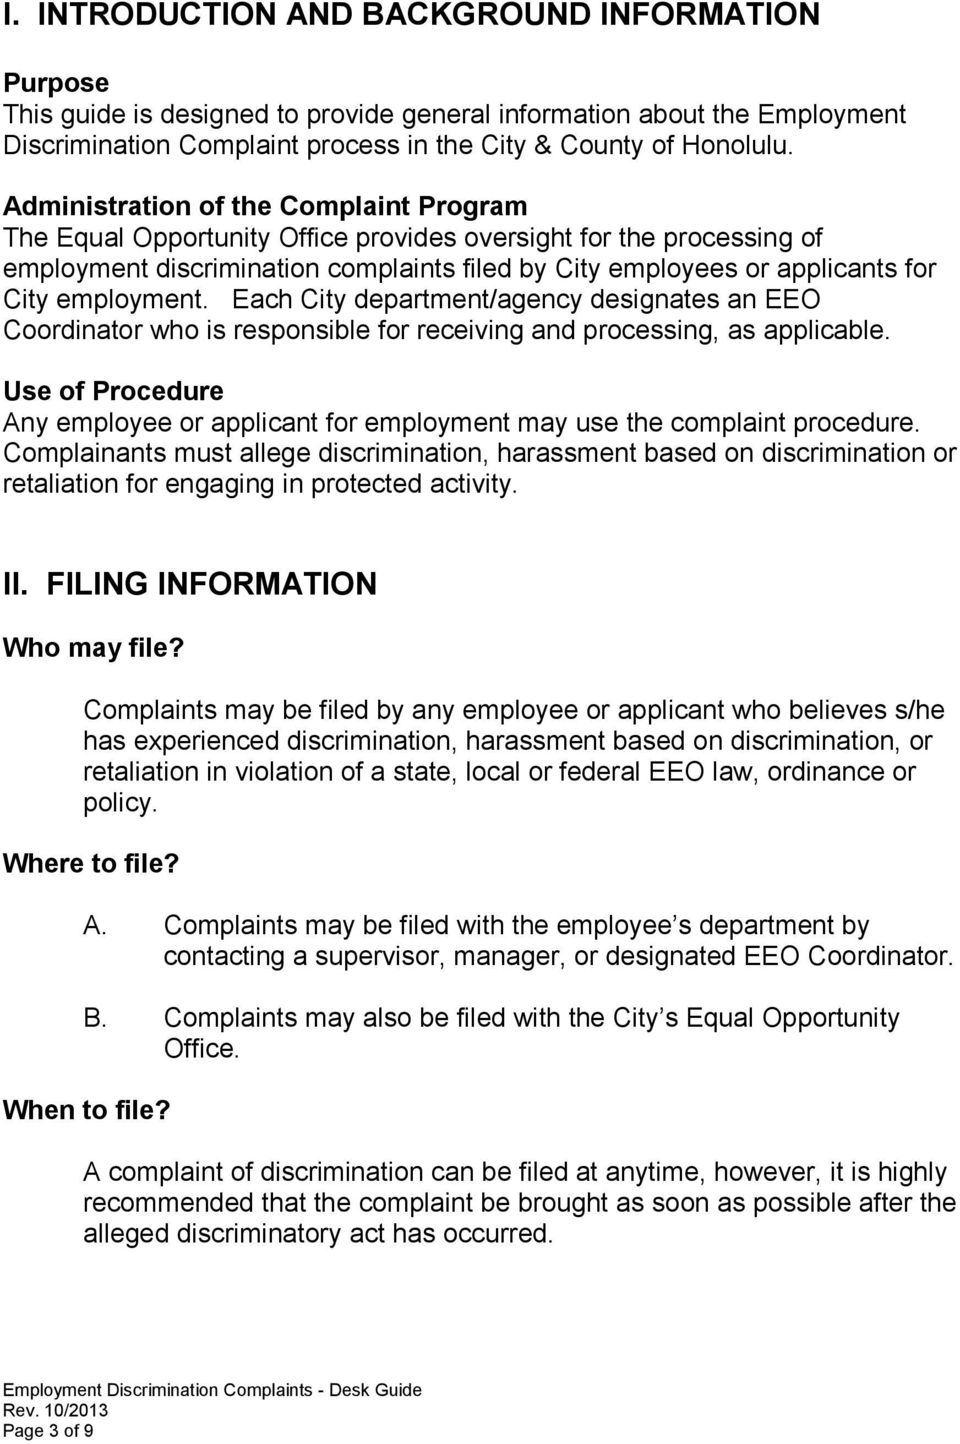 employment. Each City department/agency designates an EEO Coordinator who is responsible for receiving and processing, as applicable.